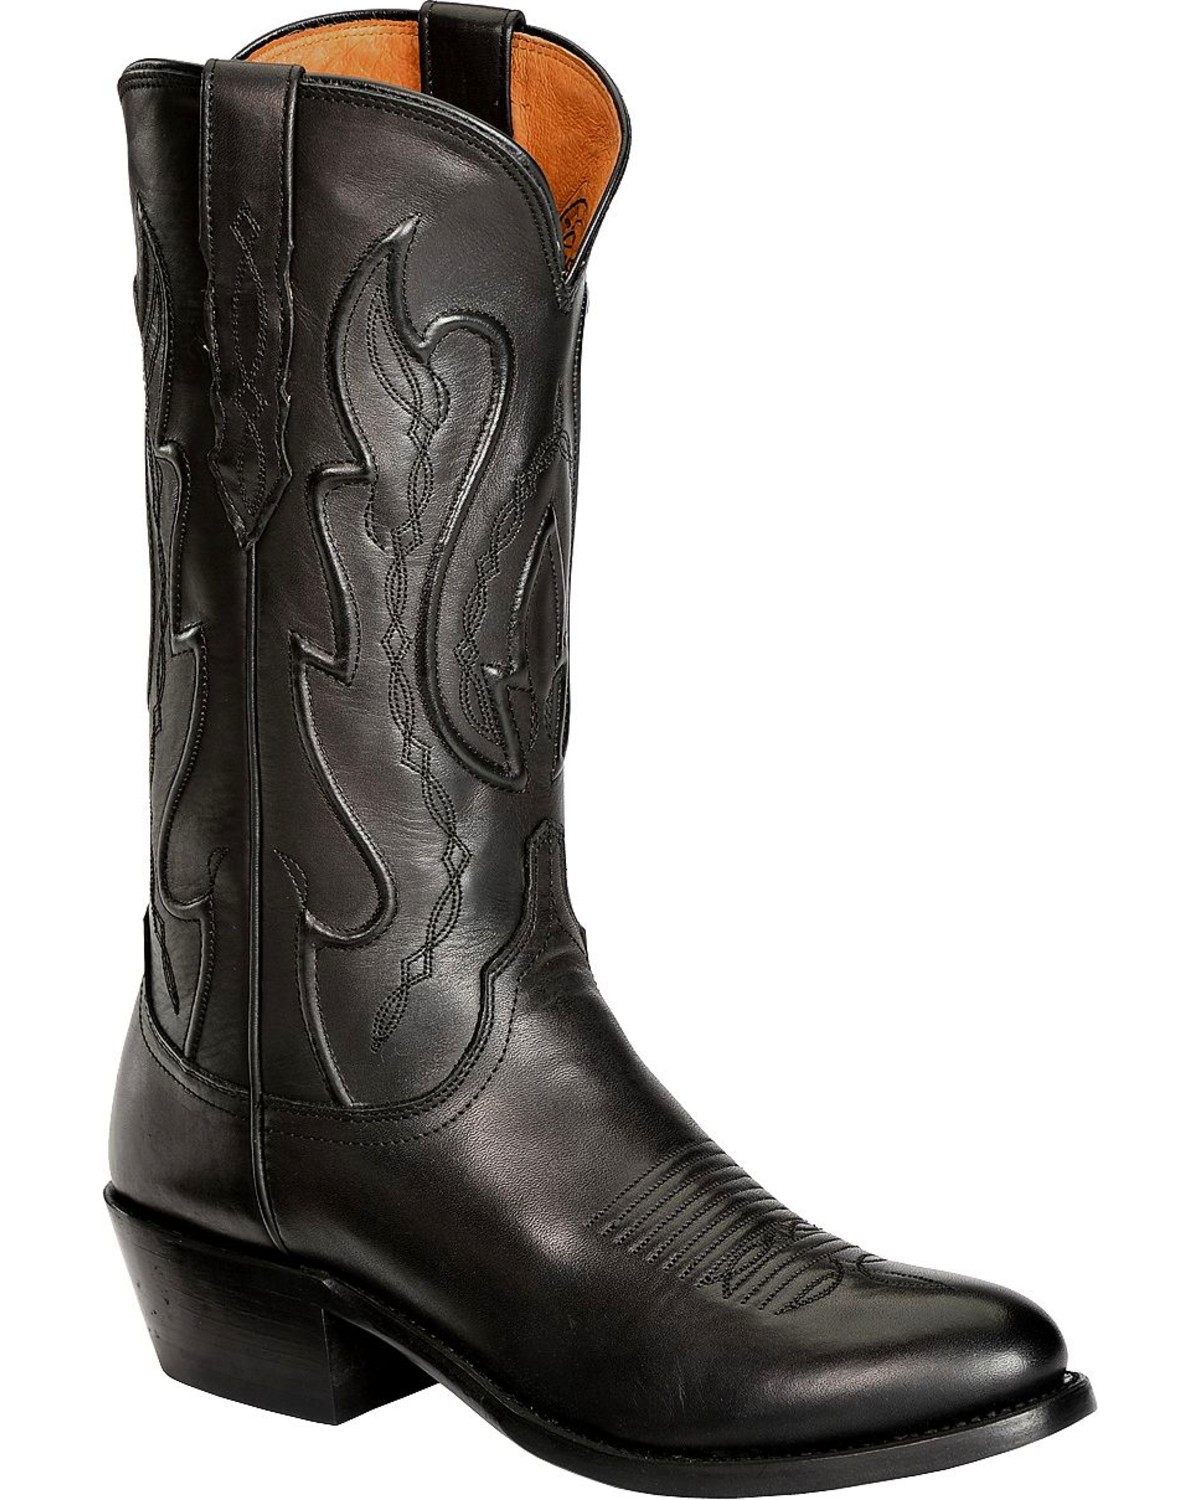 Lucchese Men's Embroidered Western Boots | Boot Barn